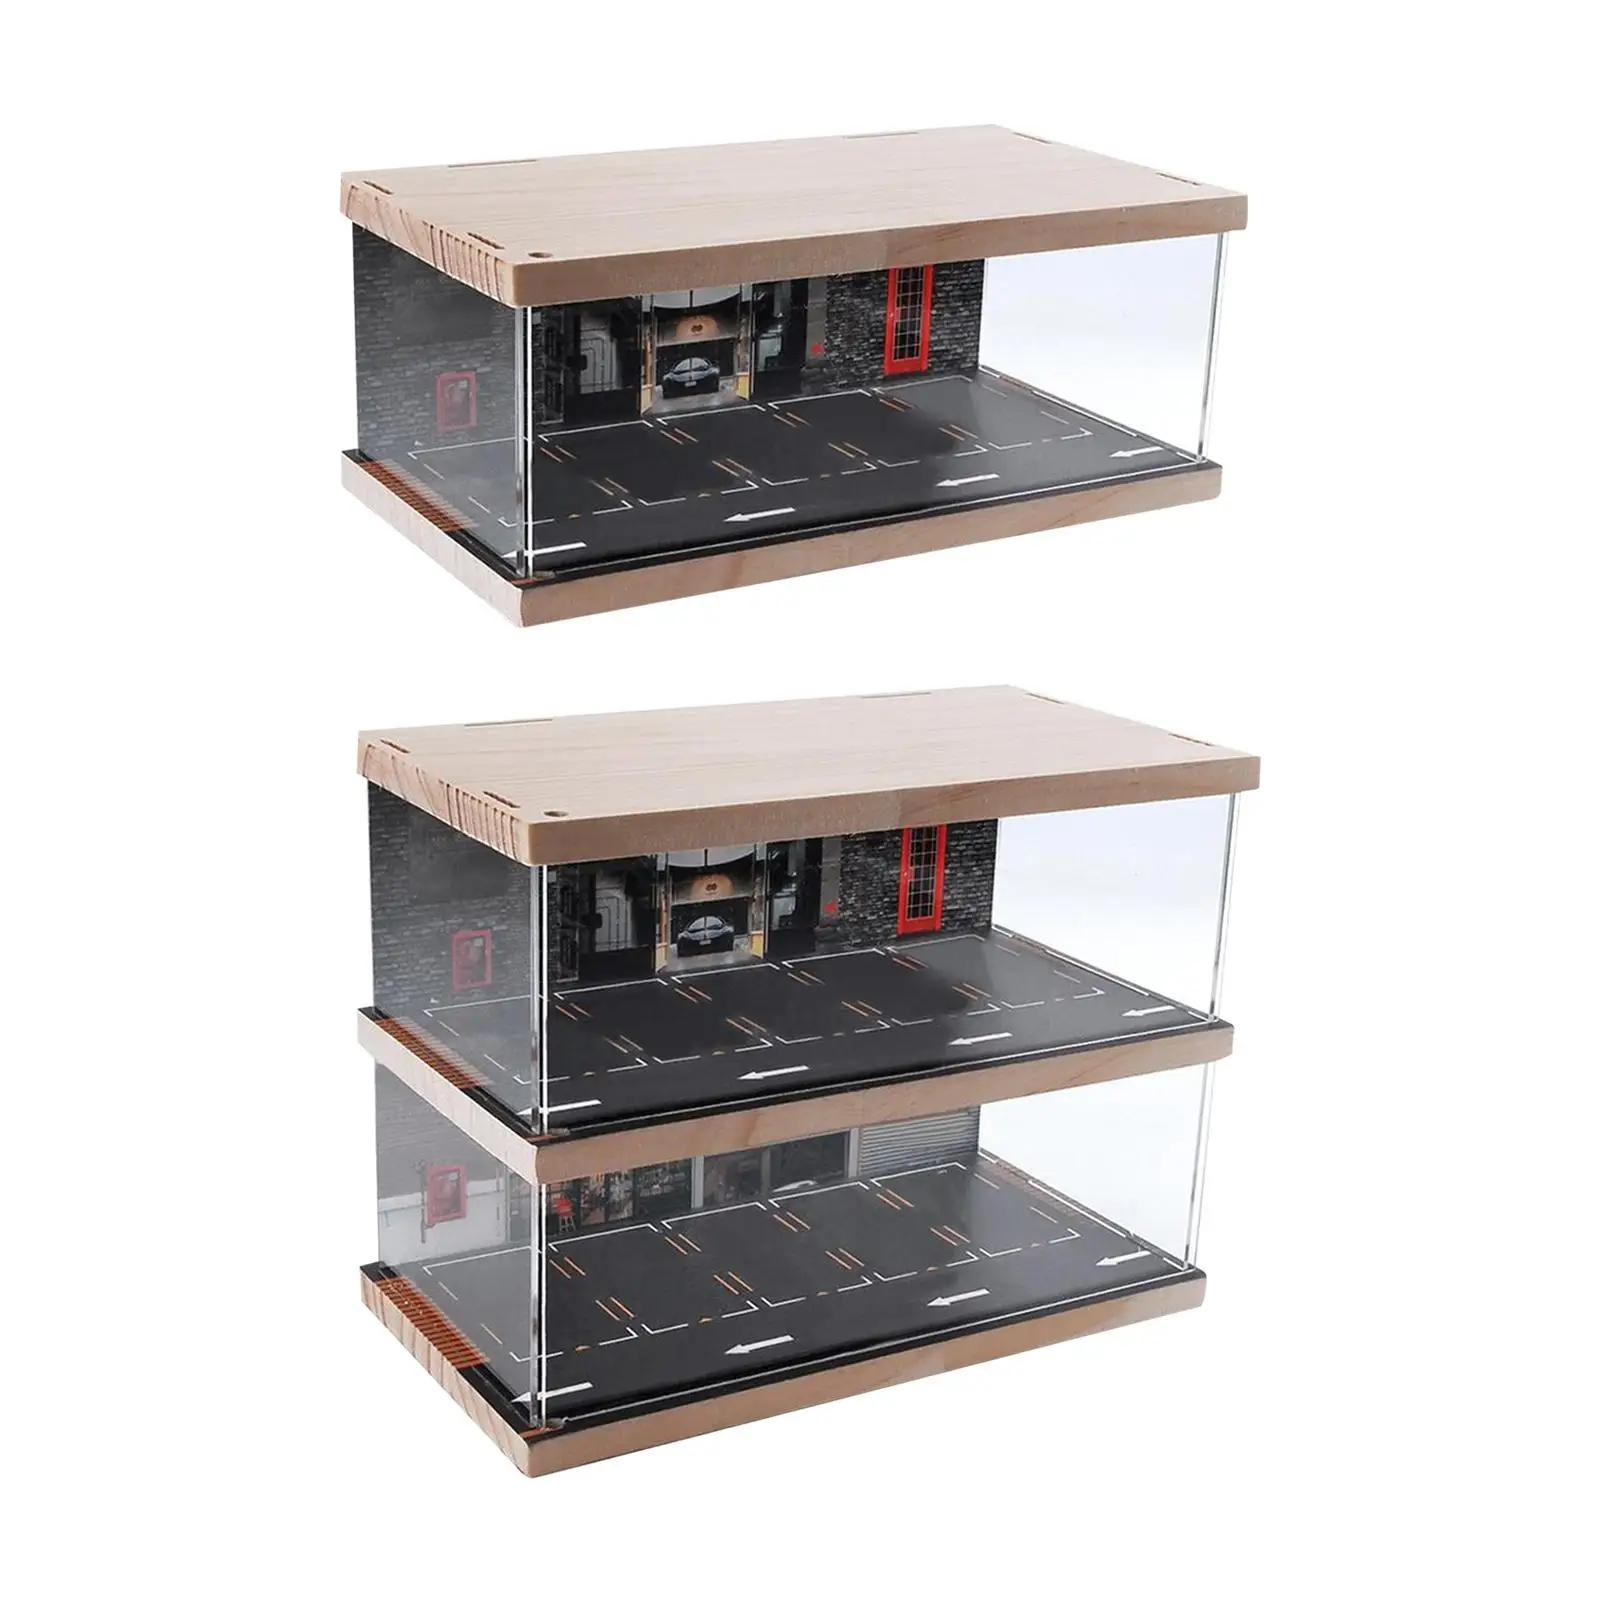 1:64 Parking Lot Display Case Collectibles Acrylic Dustproof Container Protection Collection Diorama